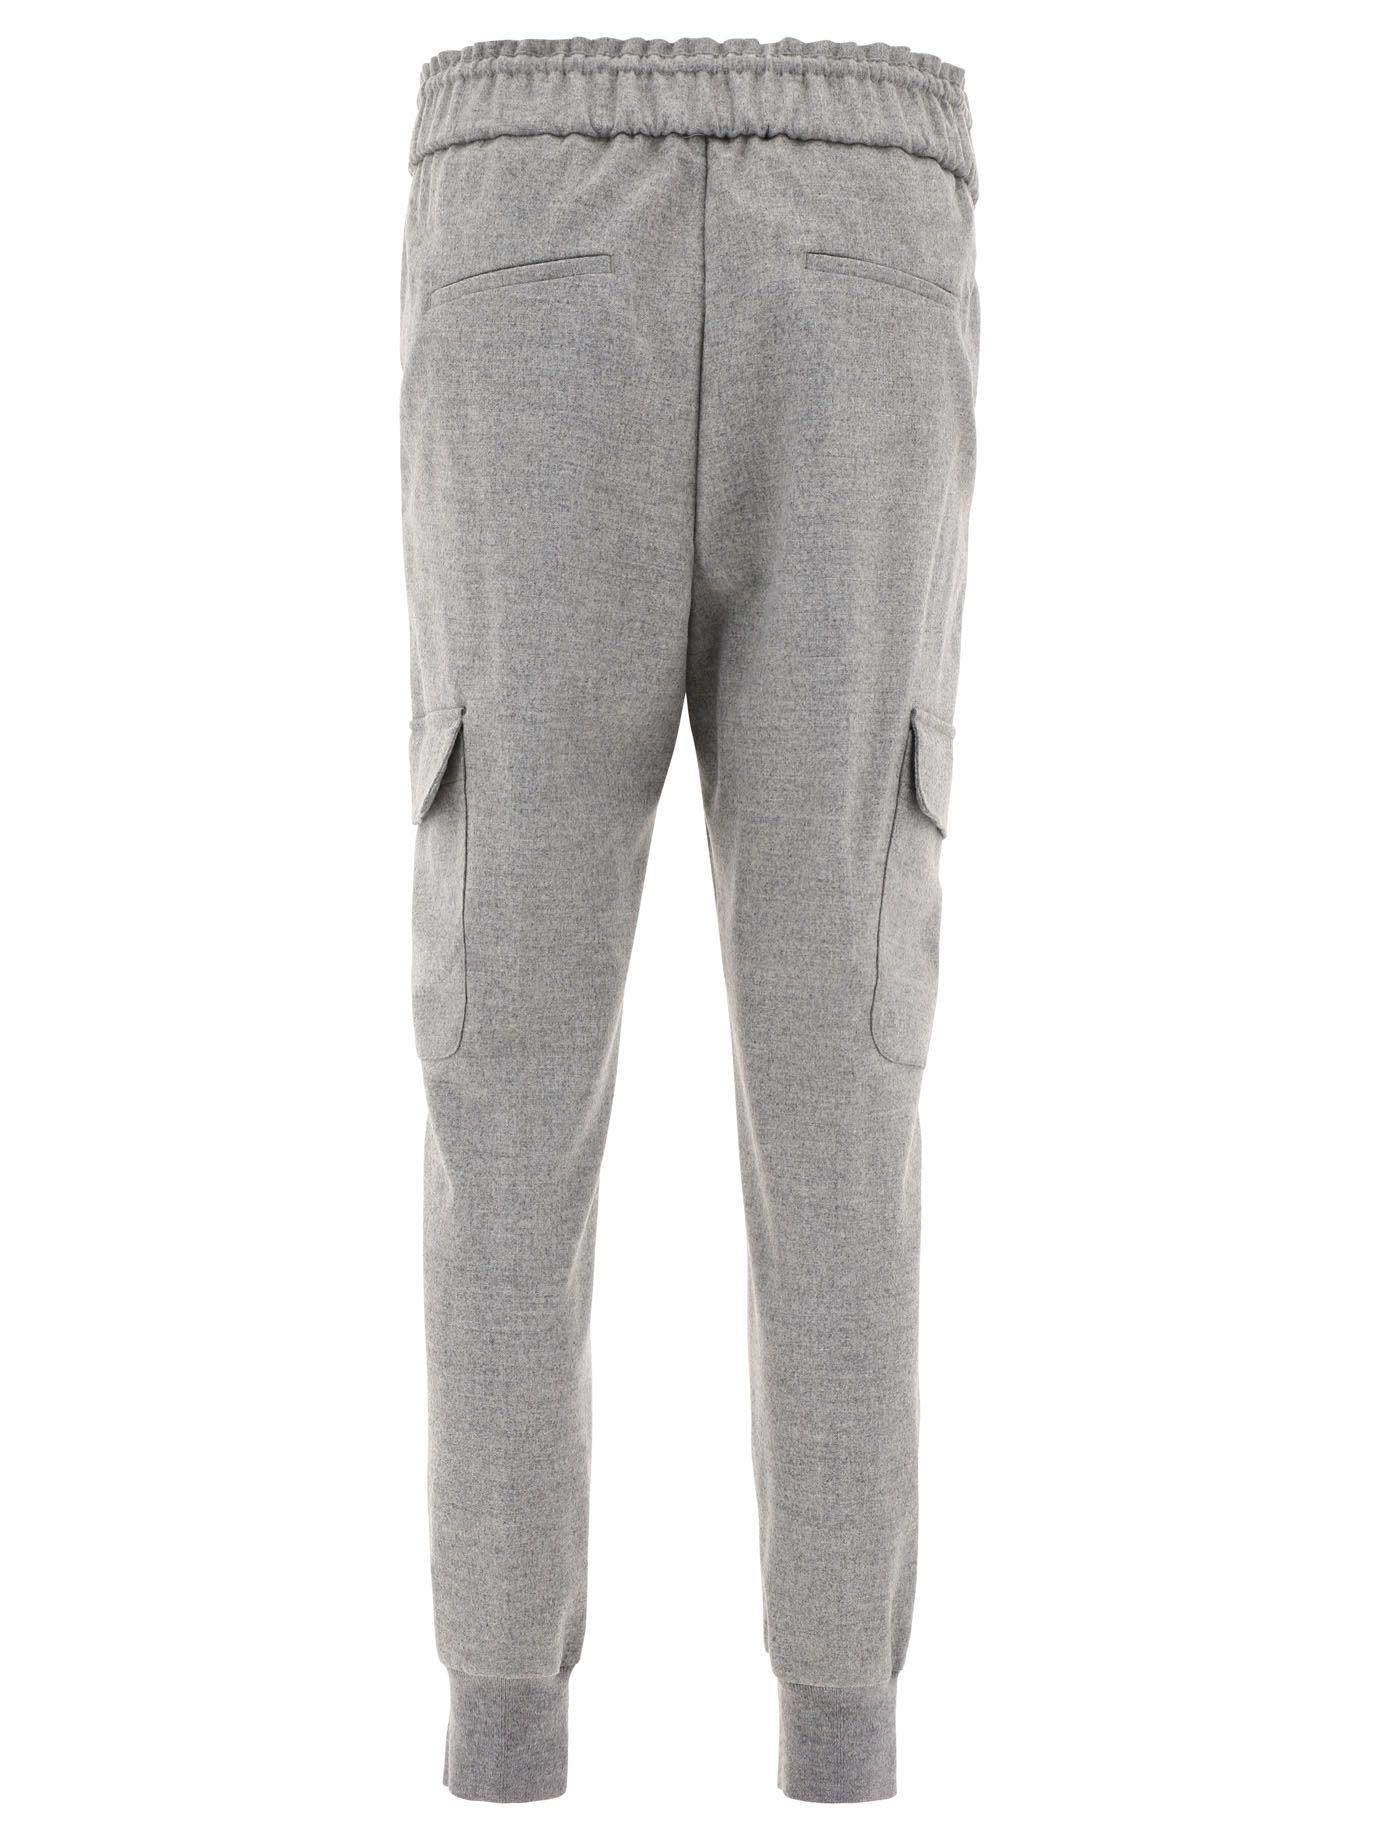 Grey Peserico Joggers With Drawstring in Grey Womens Trousers Slacks and Chinos Slacks and Chinos Peserico Trousers 